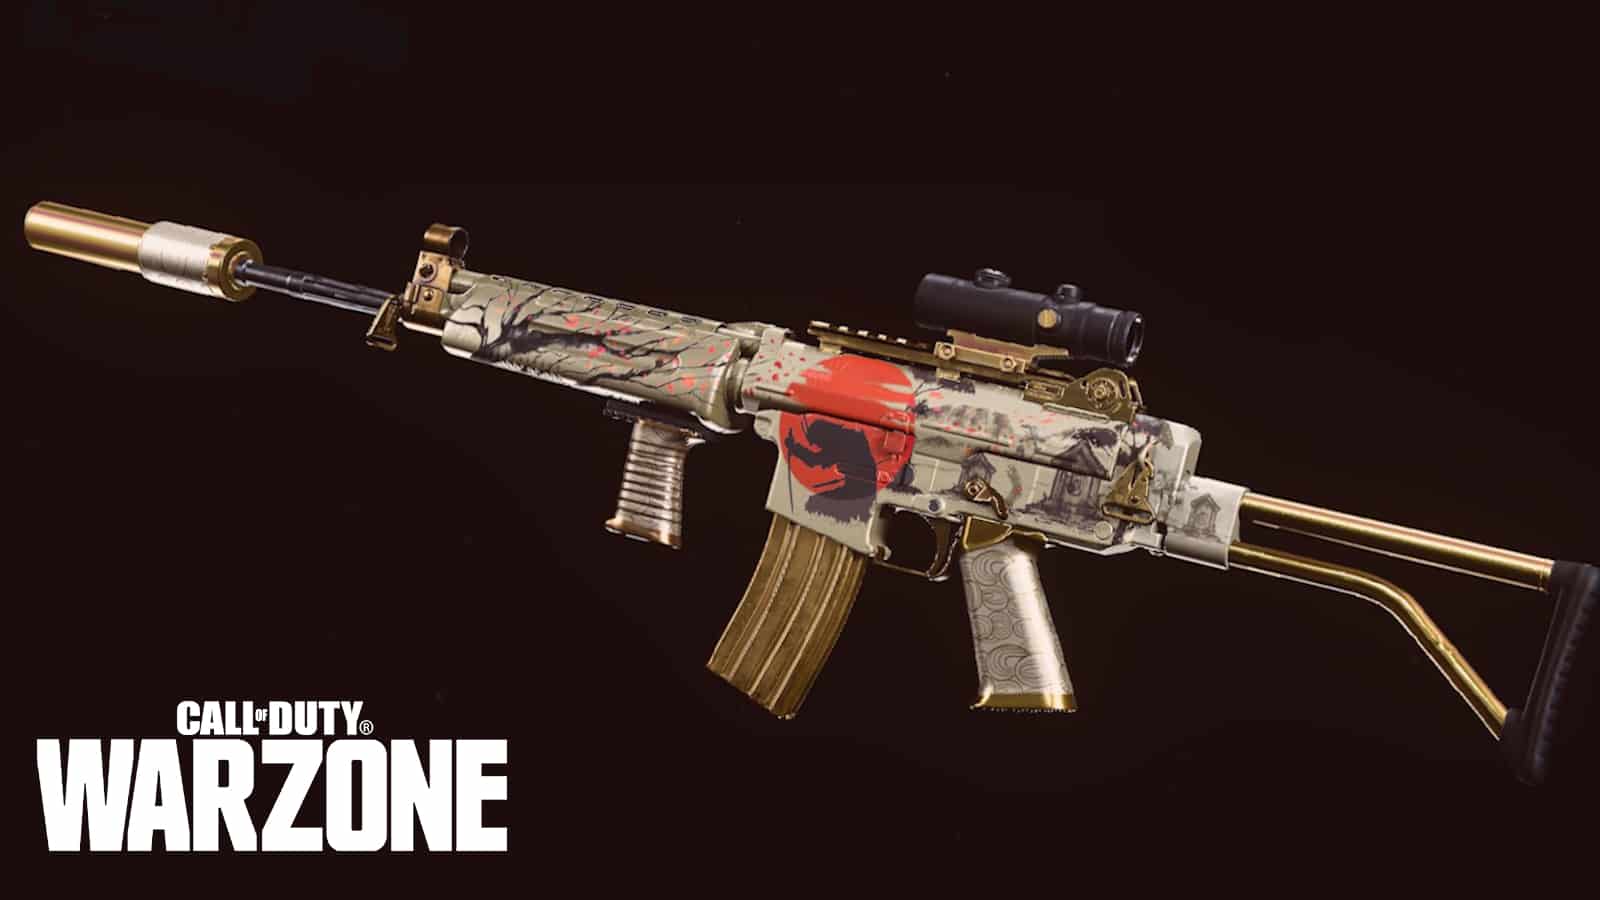 Warzone Snipers receive deadly buff with Season 5 update - Charlie INTEL